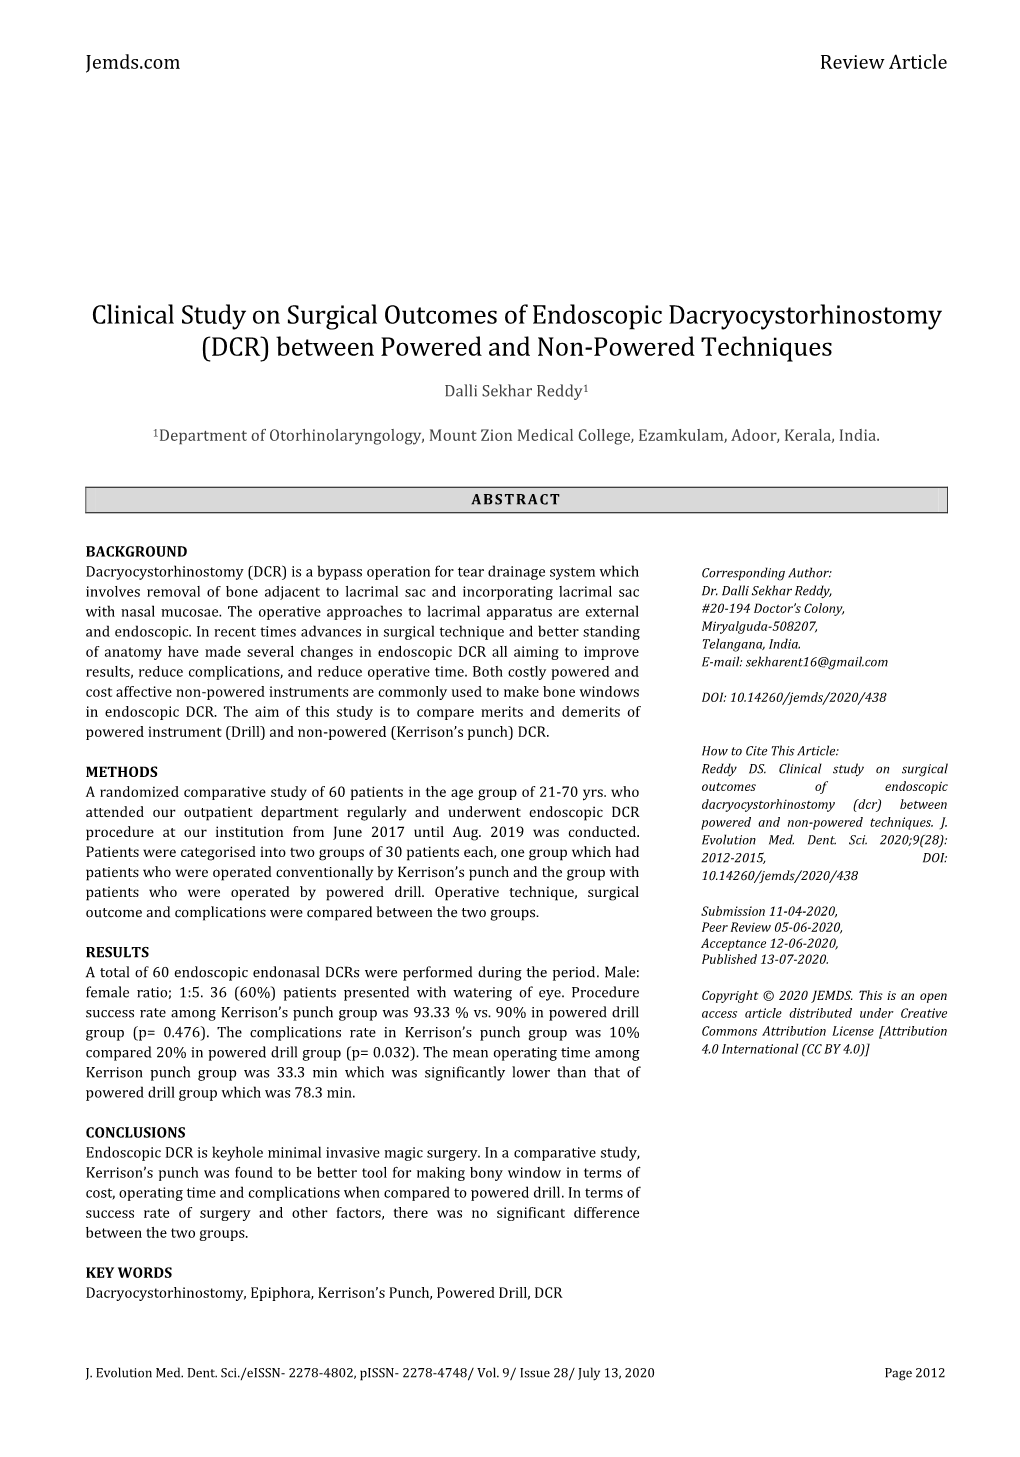 Clinical Study on Surgical Outcomes of Endoscopic Dacryocystorhinostomy (DCR) Between Powered and Non-Powered Techniques